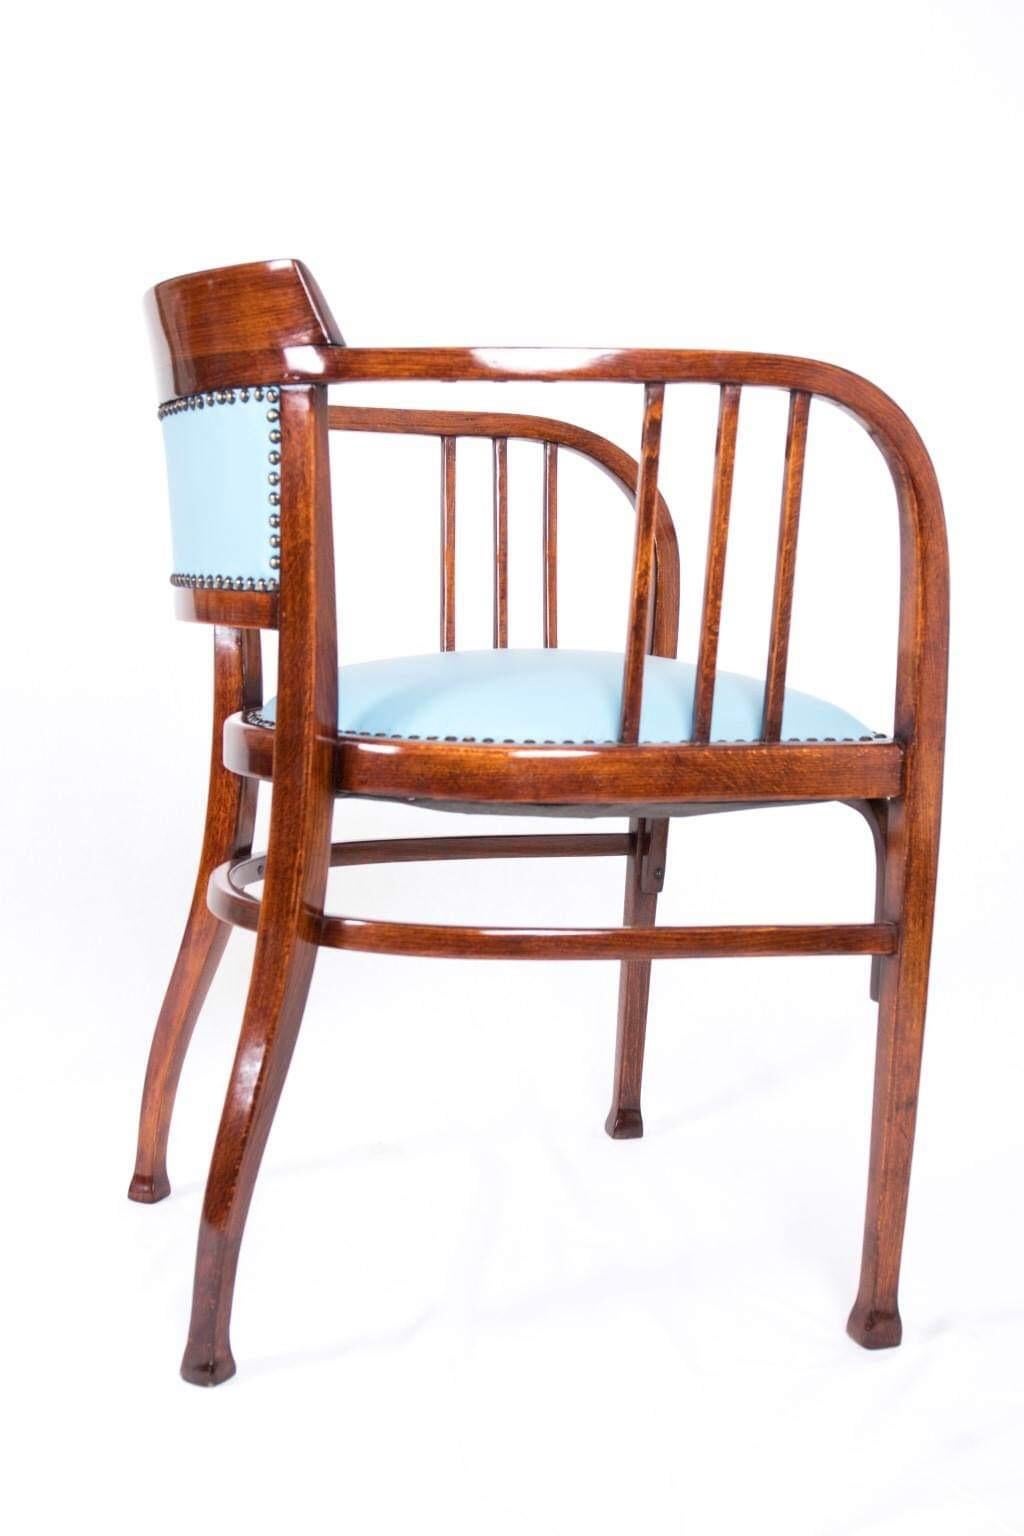 Art Nouveau Vienna Armchairs Attributed to Otto Wagner Thonet Gebruder 1